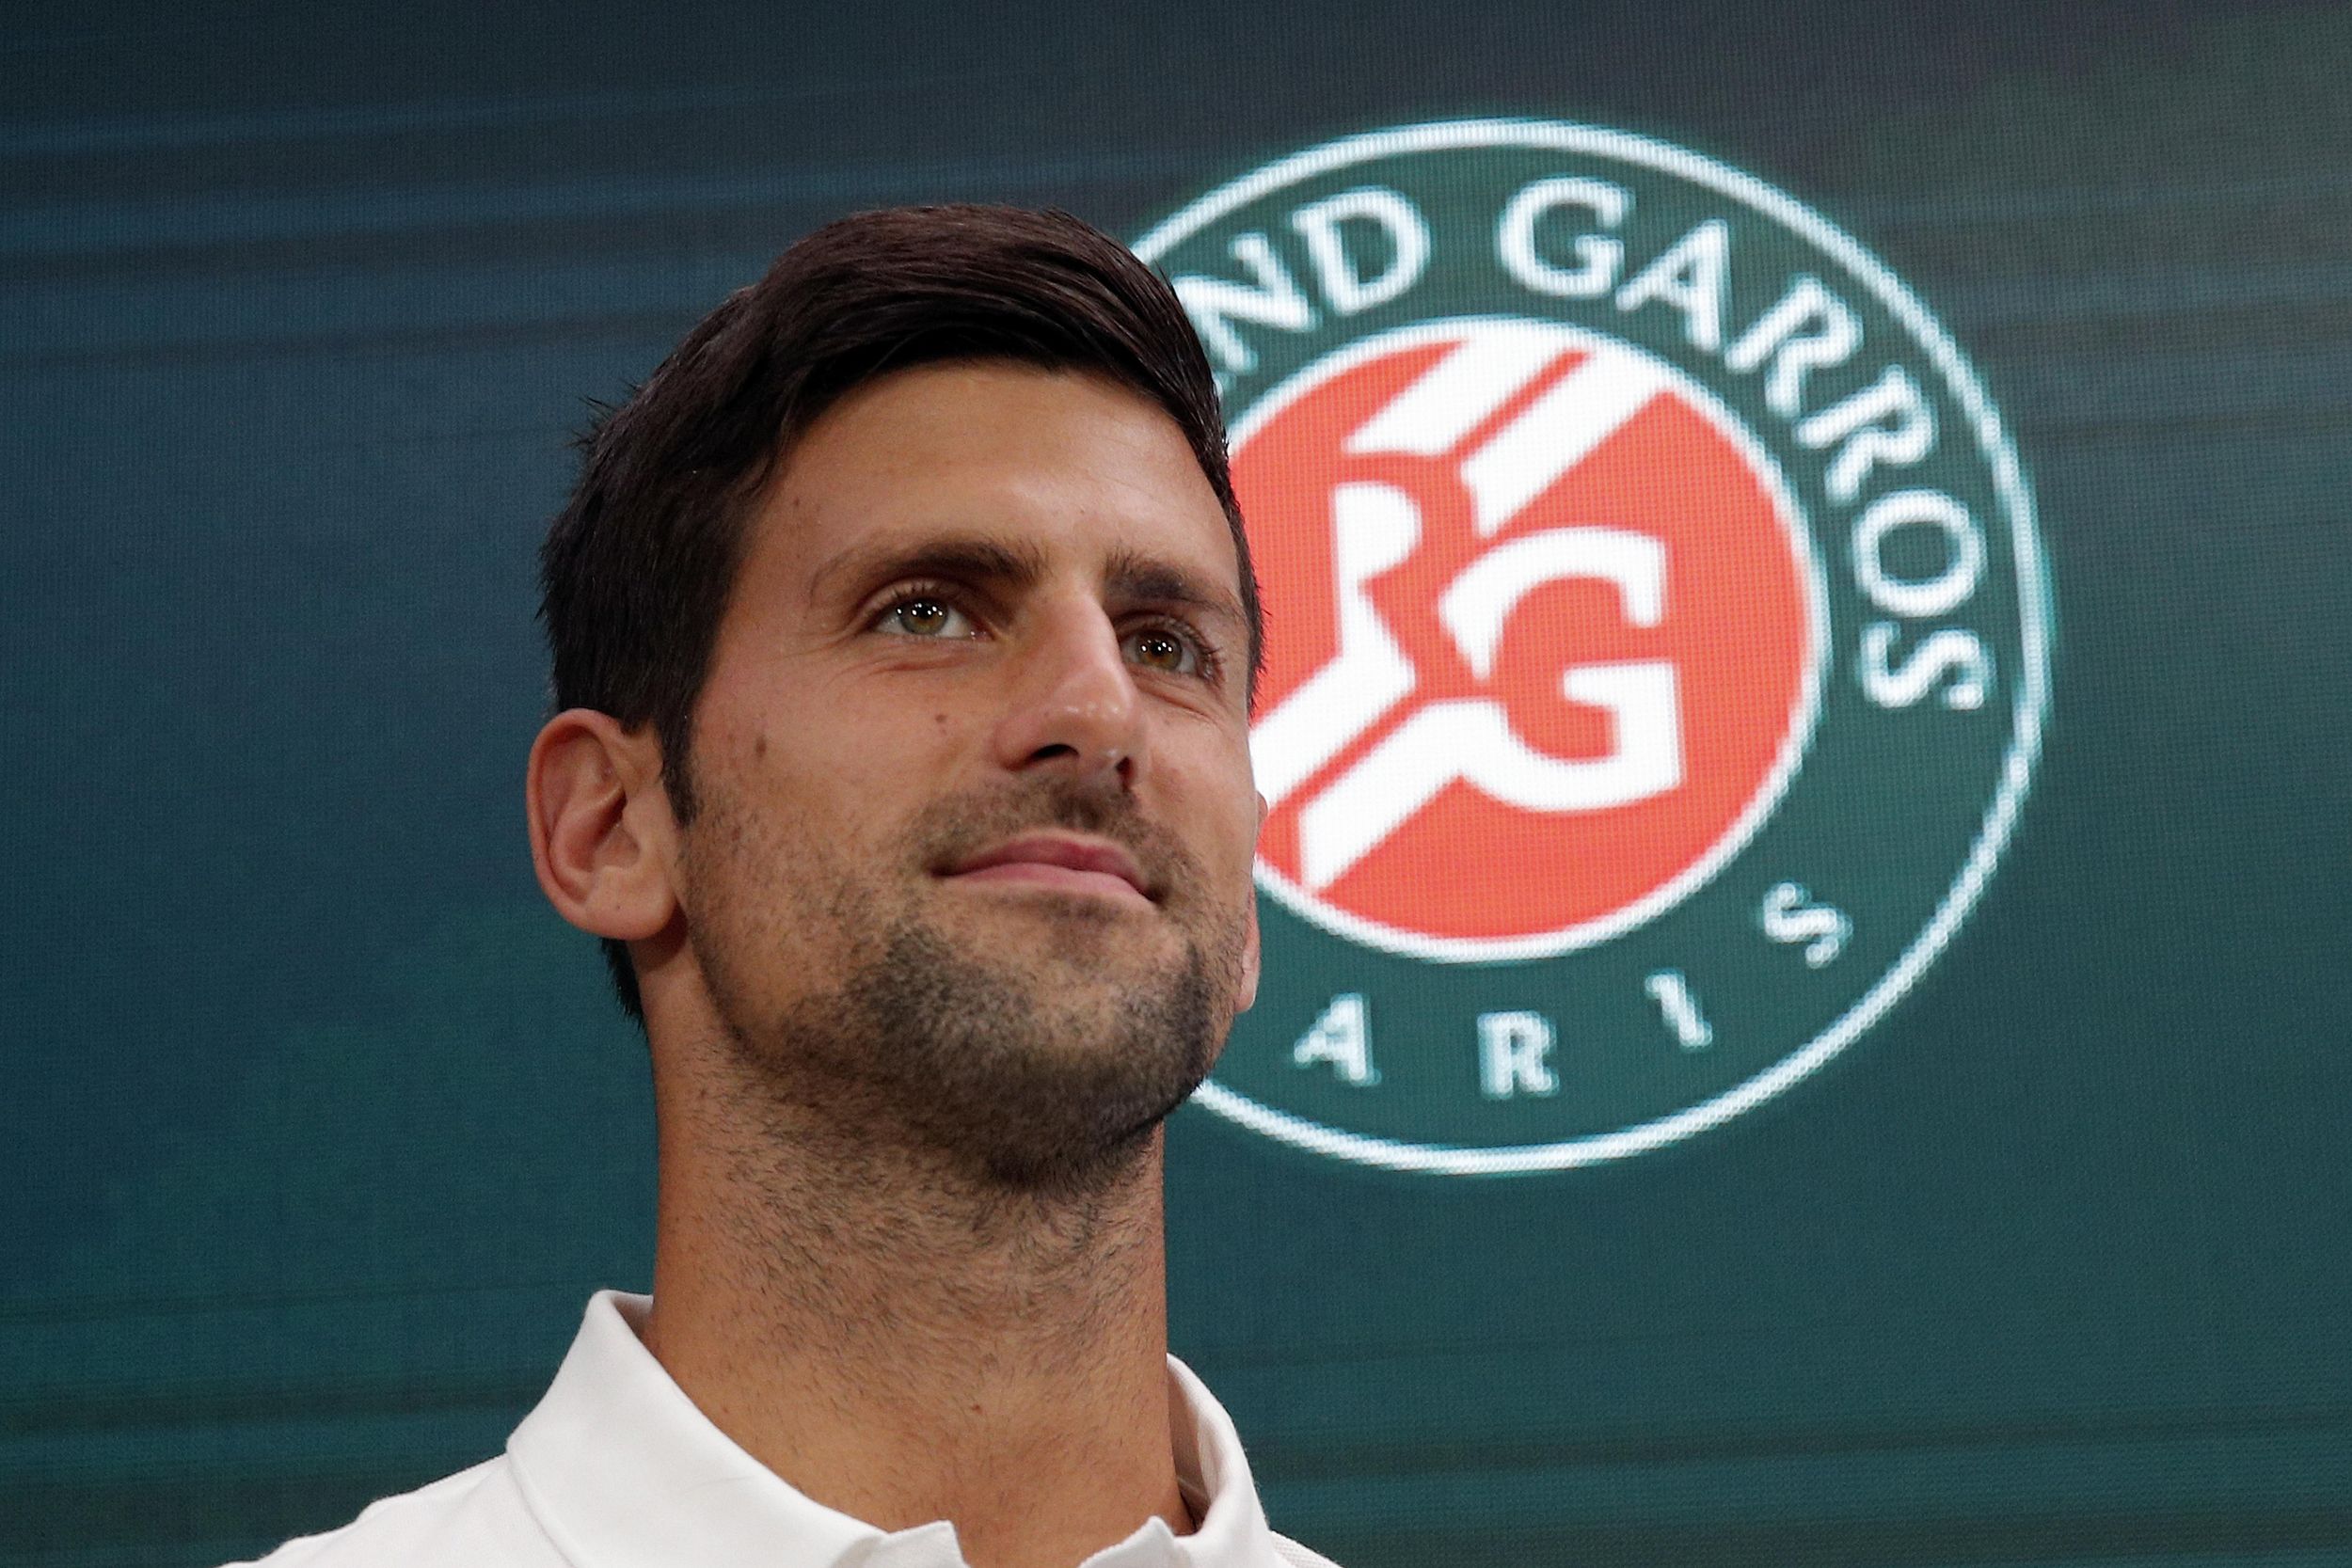 Novak Djokovic and Rafael Nadal could meet in French Open semifinals